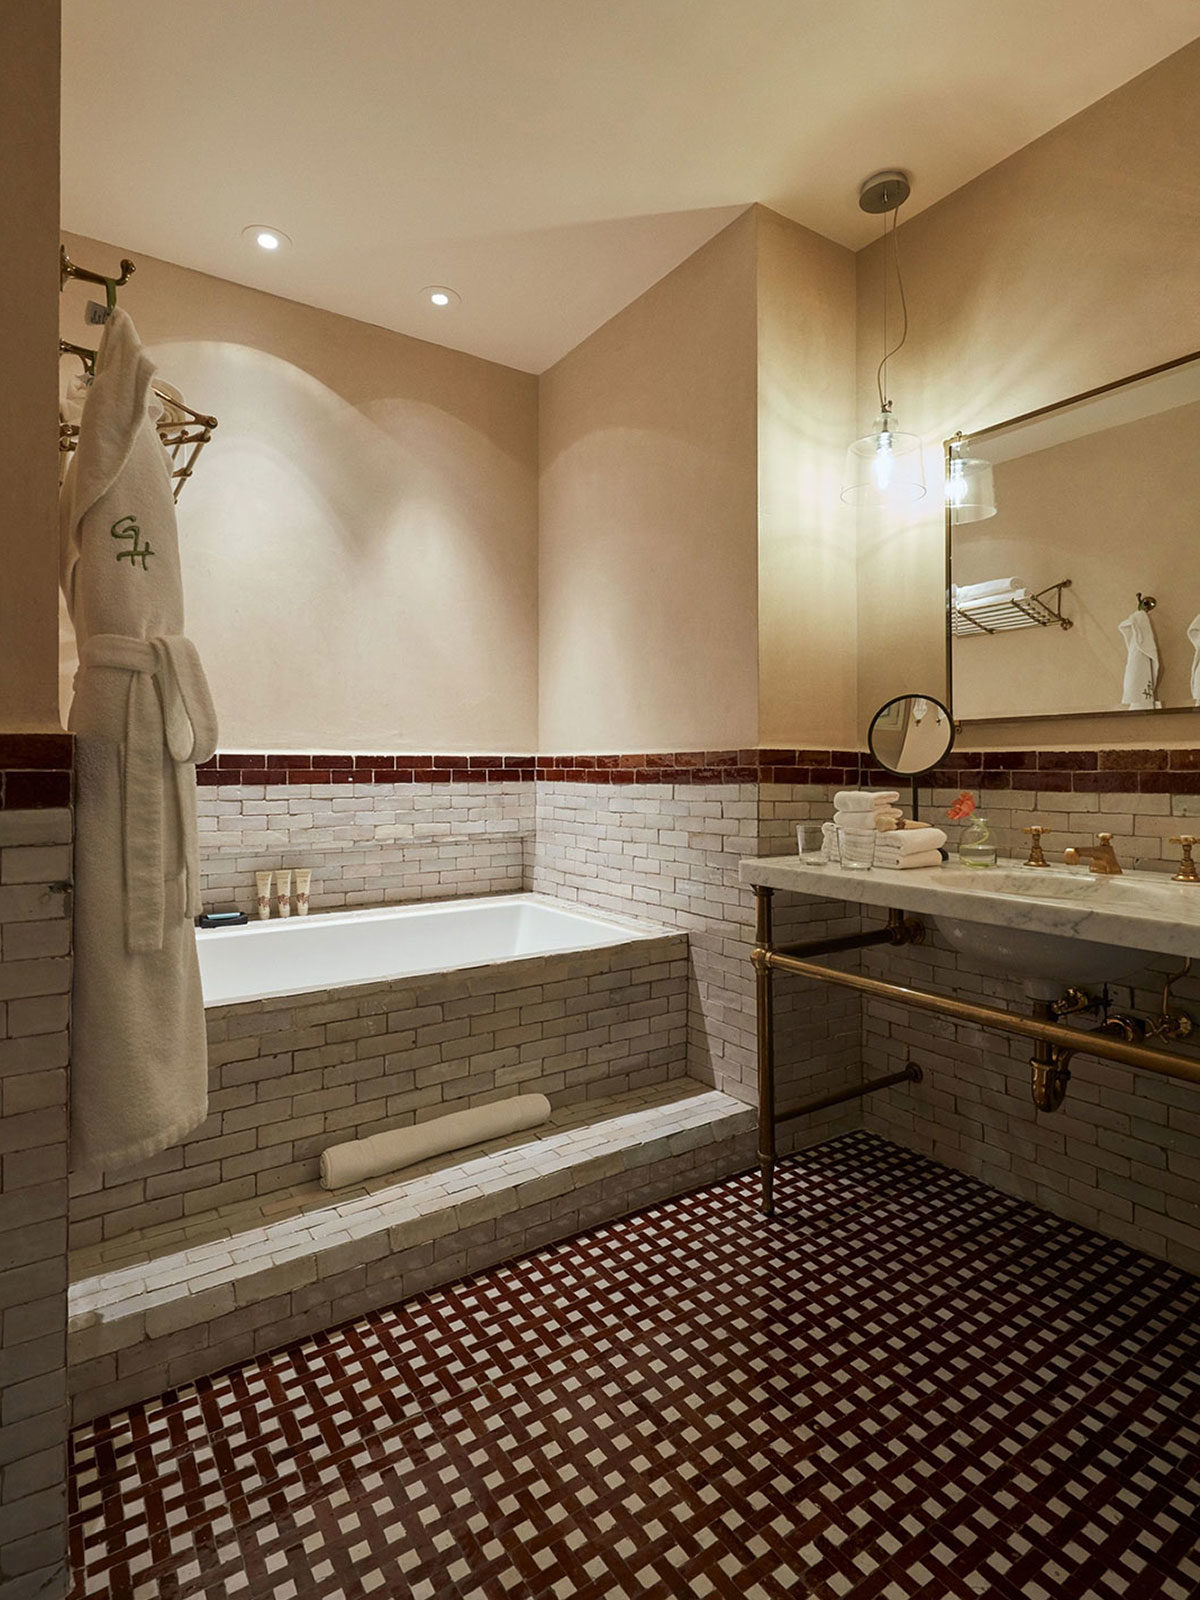 Bathroom with Red and White Tile at The Greenwich Hotel